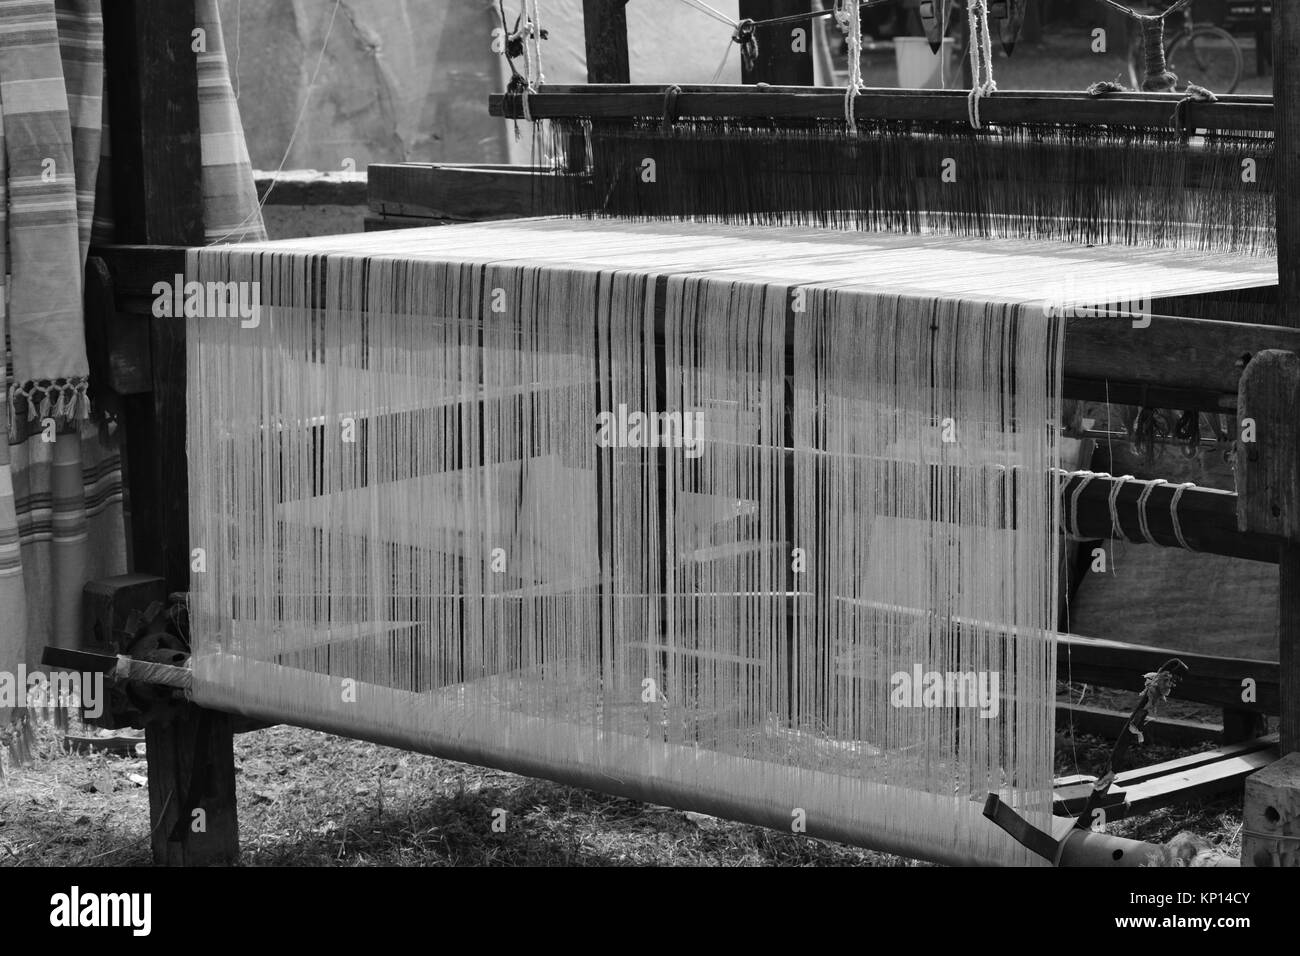 A hand loom made of wood  in monochrome. Stock Photo